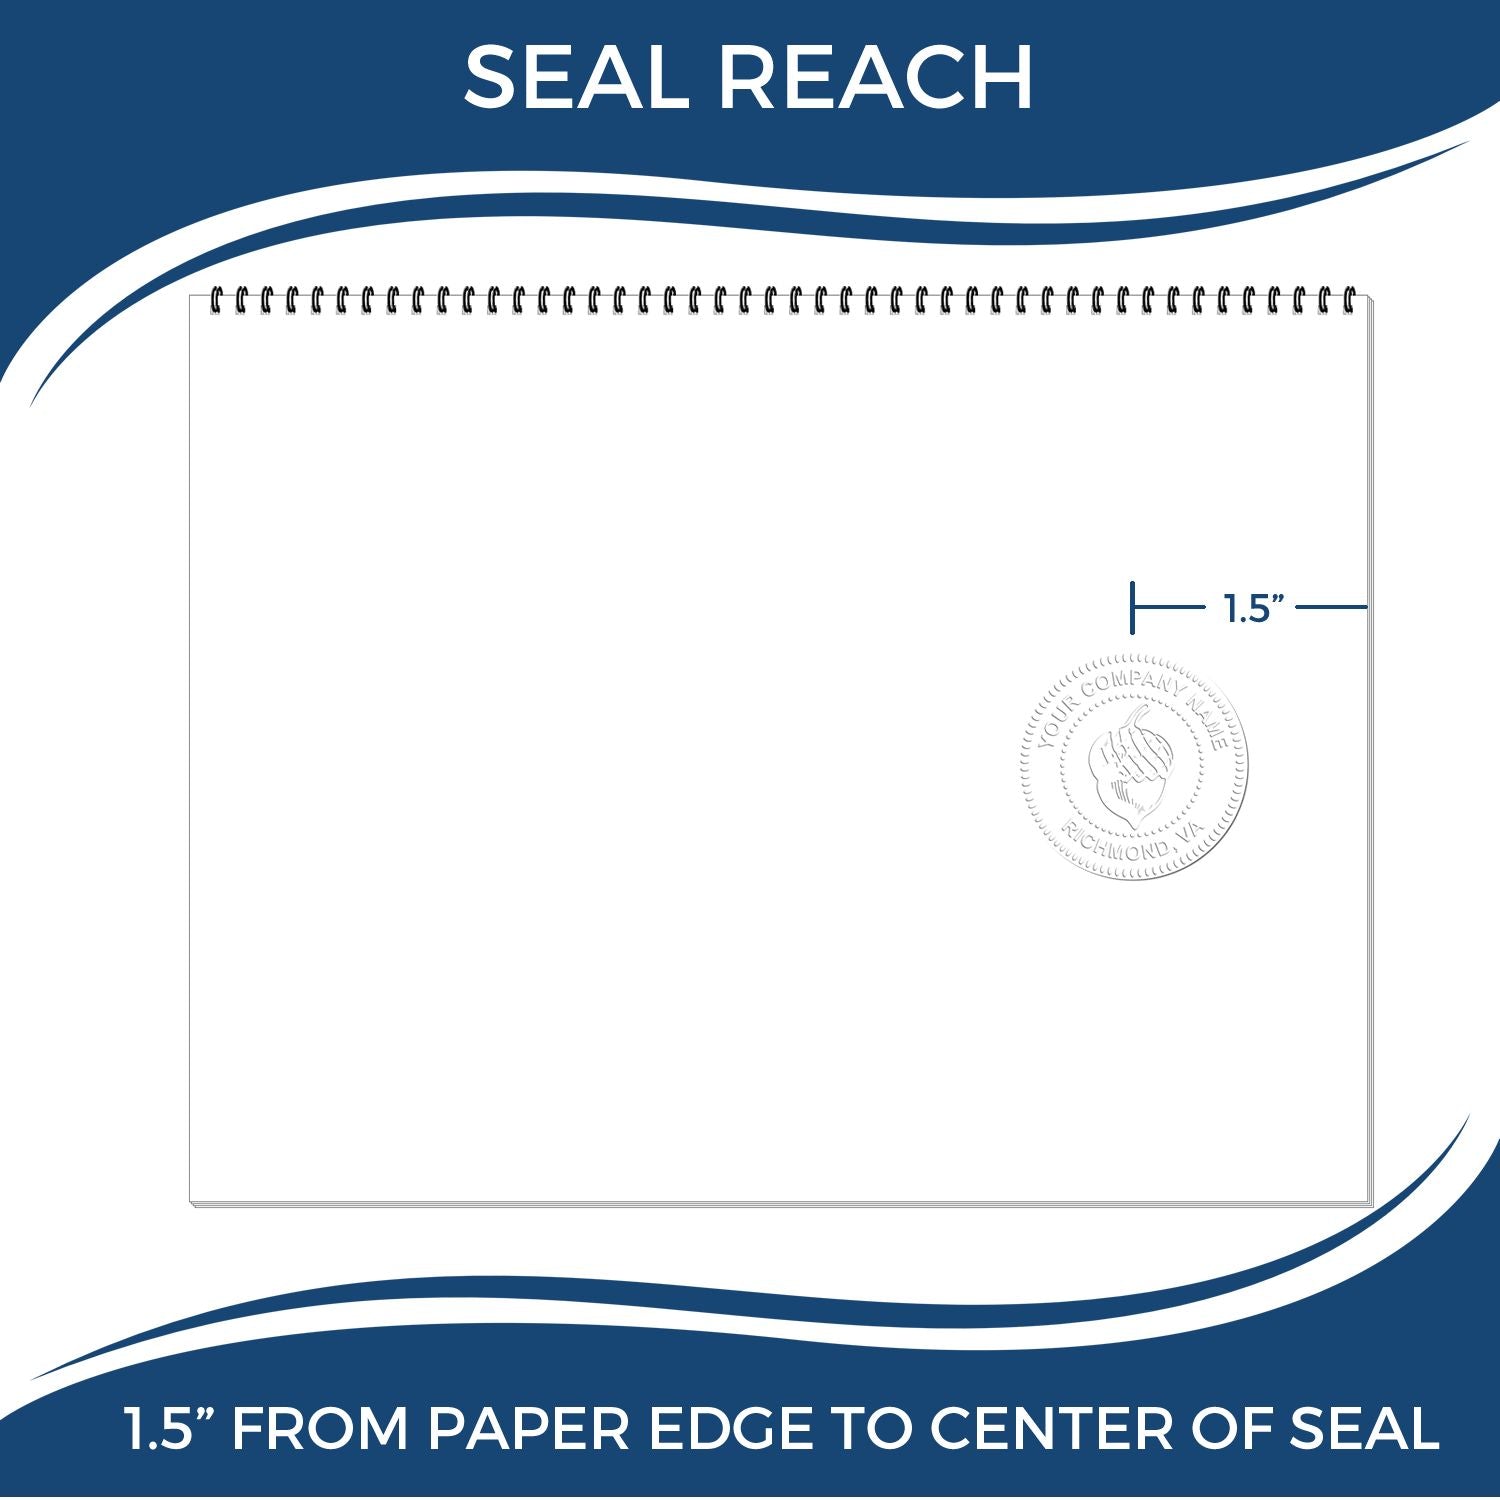 An infographic showing the seal reach which is represented by a ruler and a miniature seal image of the Oregon Engineer Desk Seal